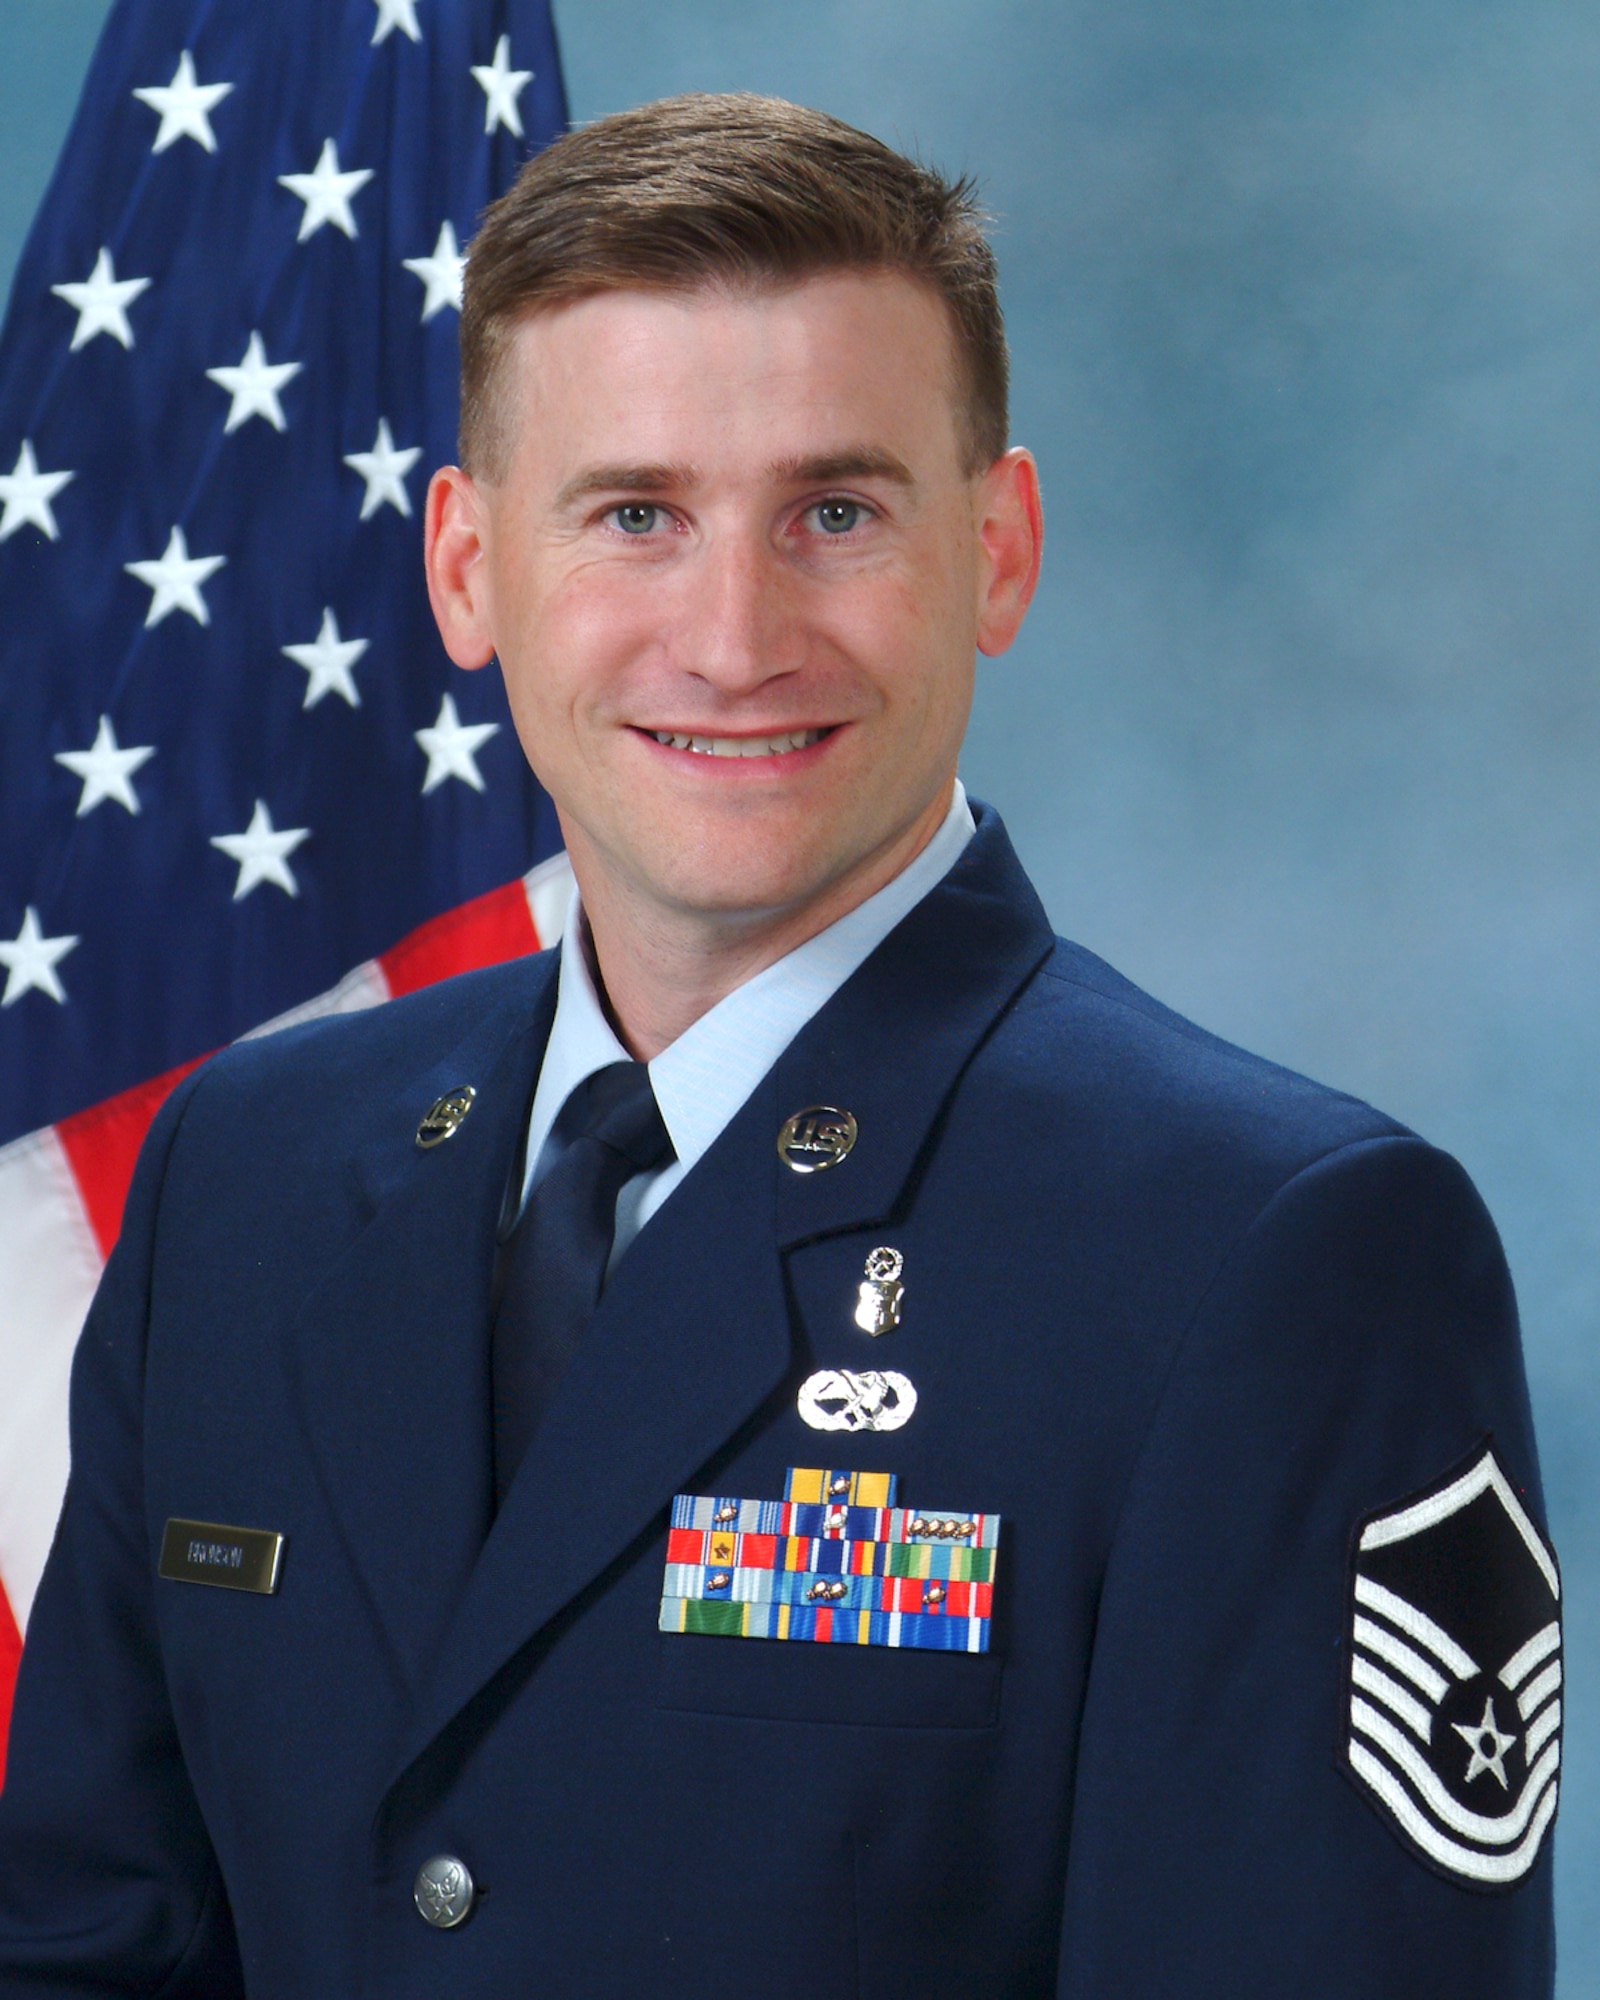 Master Sgt. Mark Bronson, 21st Medical Support Squadron, 21st Medical Group, was selected as Air Force Space Command’s "Outstanding Radiology Senior Noncommissioned Officer of the Year." He displayed exemplary leadership abilities, performing duties as both squadron superintendent and the X-ray NCO in charge, directing six flights and 110 personnel, successfully treating more than 1,100 patients. Additionally, he oversaw $24 million of medical assets including four squadrons, 12 clinics and 40 Health Care Providers supporting more than 142,000 beneficiaries. Sergeant Bronson chaired the Team Pete monthly promotion ceremony committee, leading 15 team members and recognizing 275 deserving promotees. Finally, as the President of Medical Group Top-3 and interim Pikes Peak Top-3 treasurer, he supported six U.S. Air Force Academy football games, raising more than $4,000 for enlisted programs. (U.S. Air Force photo)
